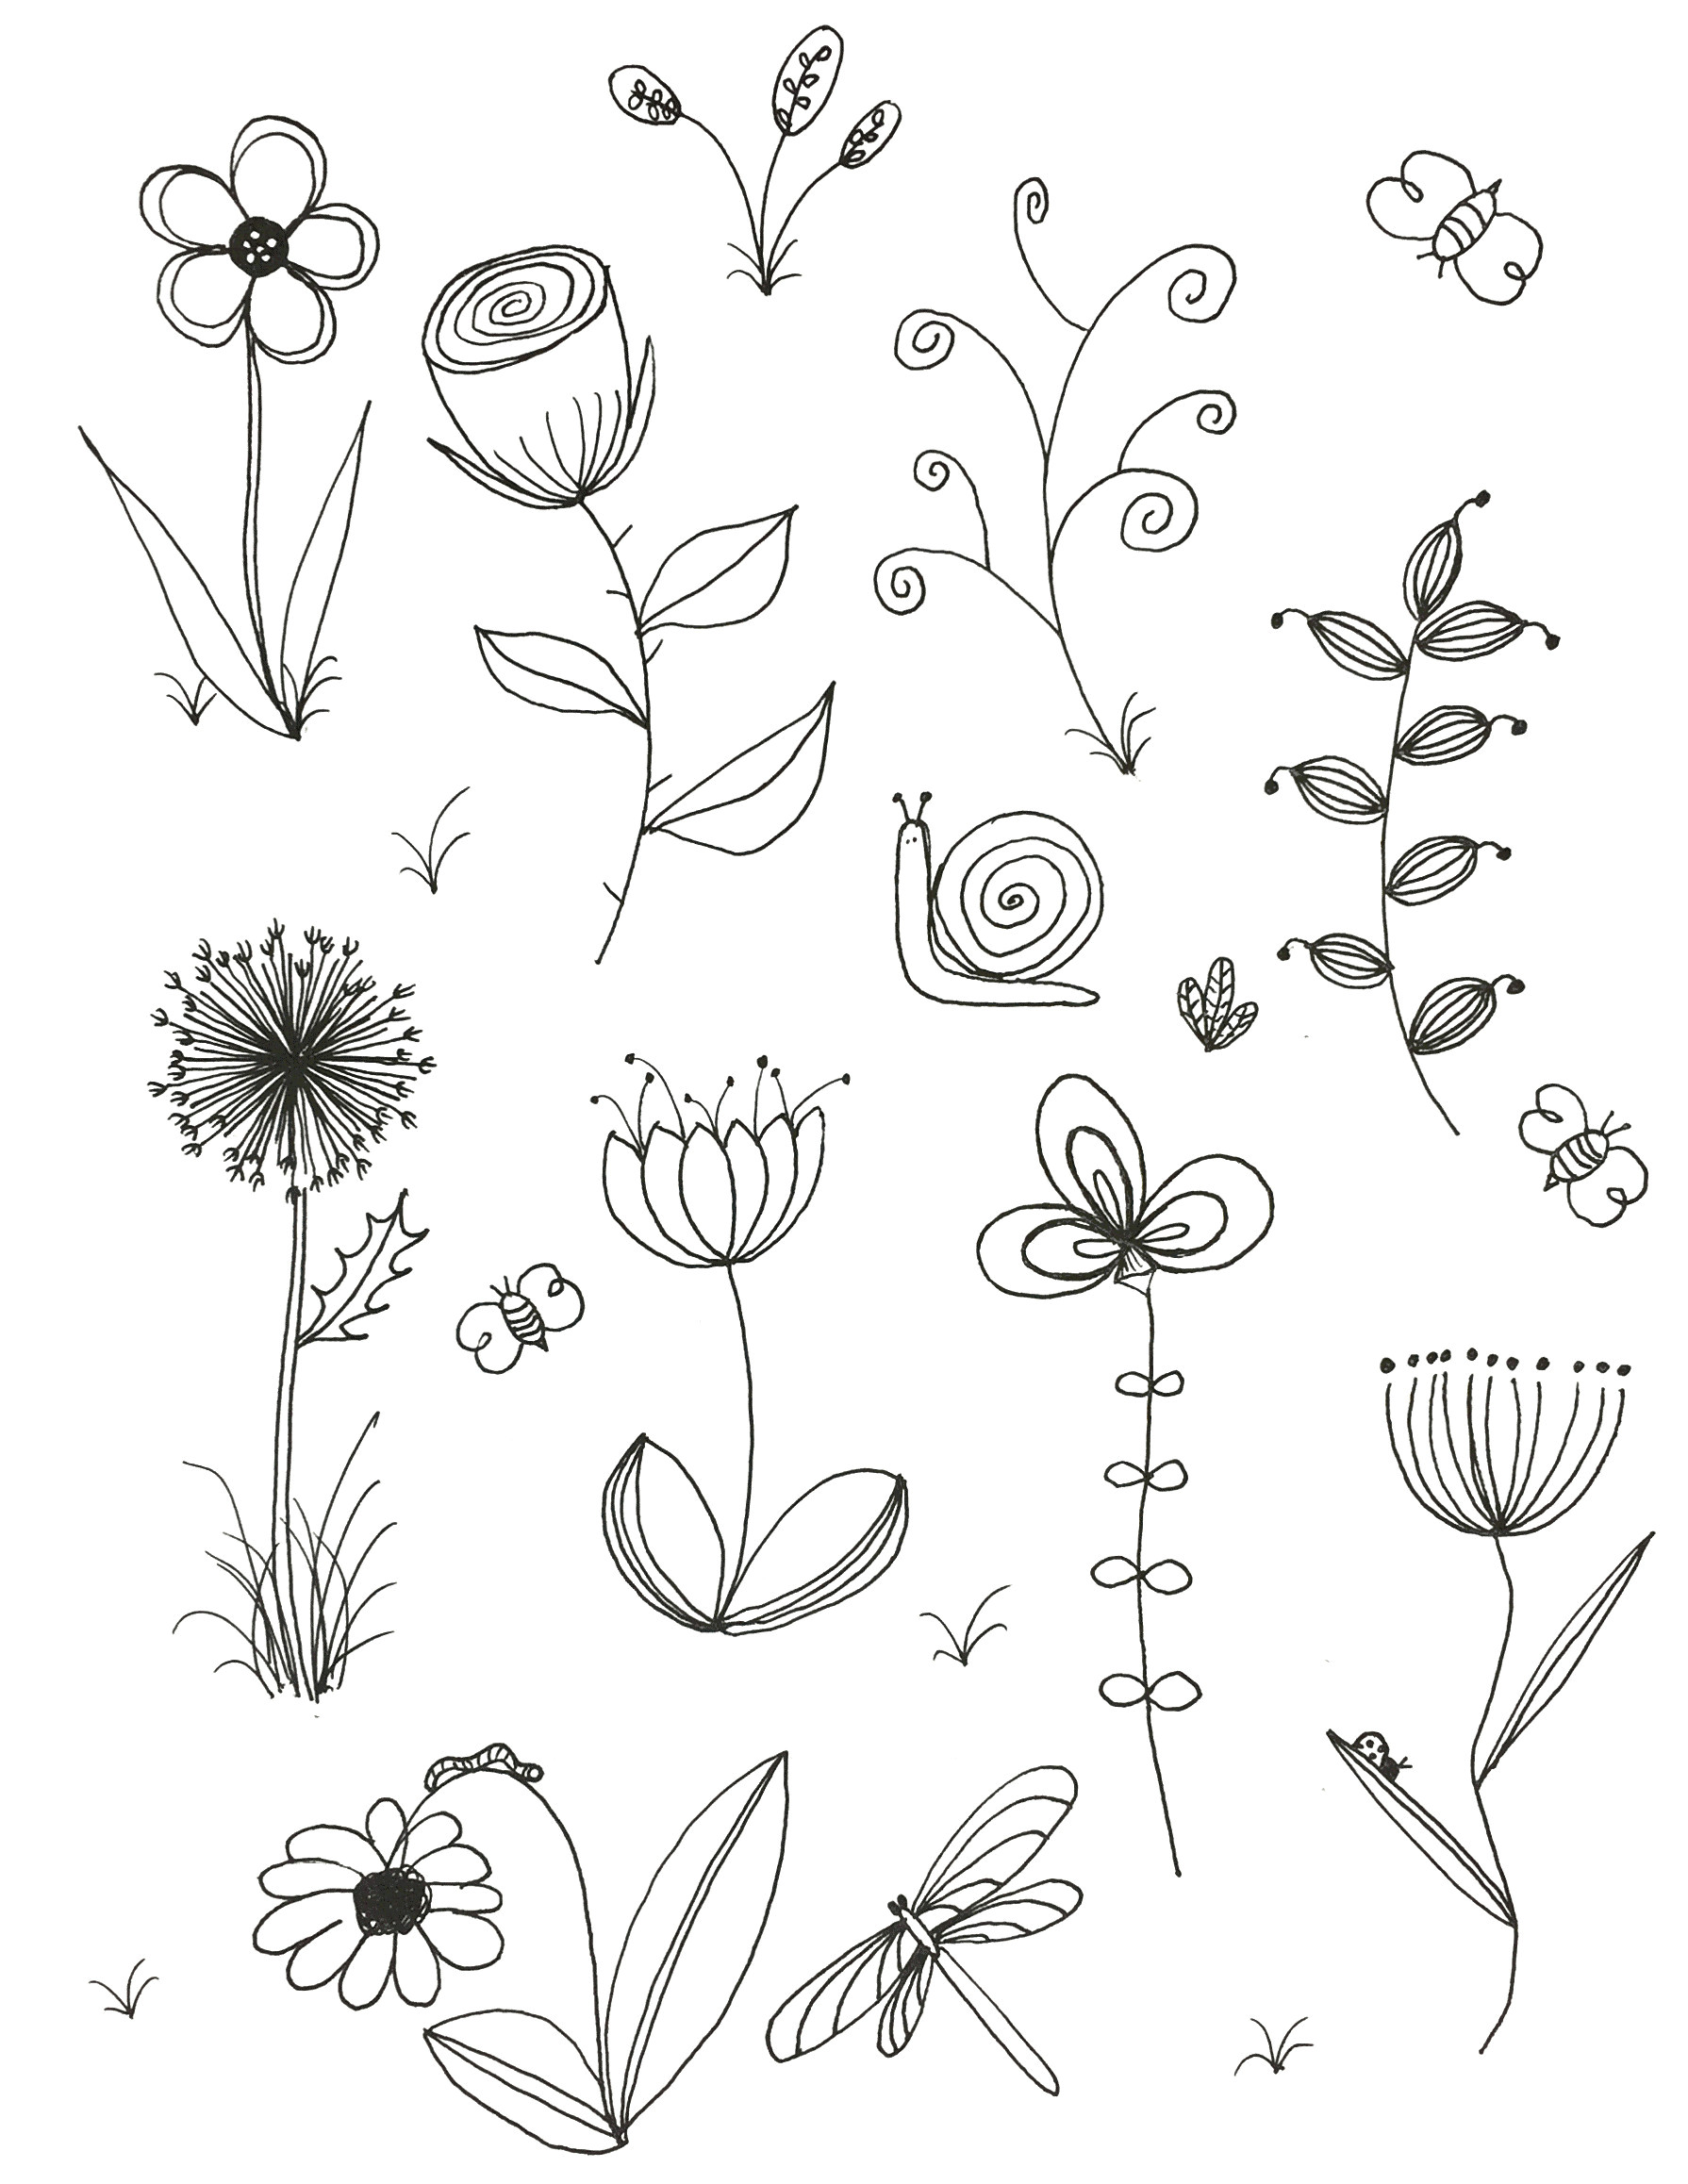 Drawing Pictures Of Flowers that are Easy Easy to Draw Spring Pictures Spring Coloring Pages New Coloring